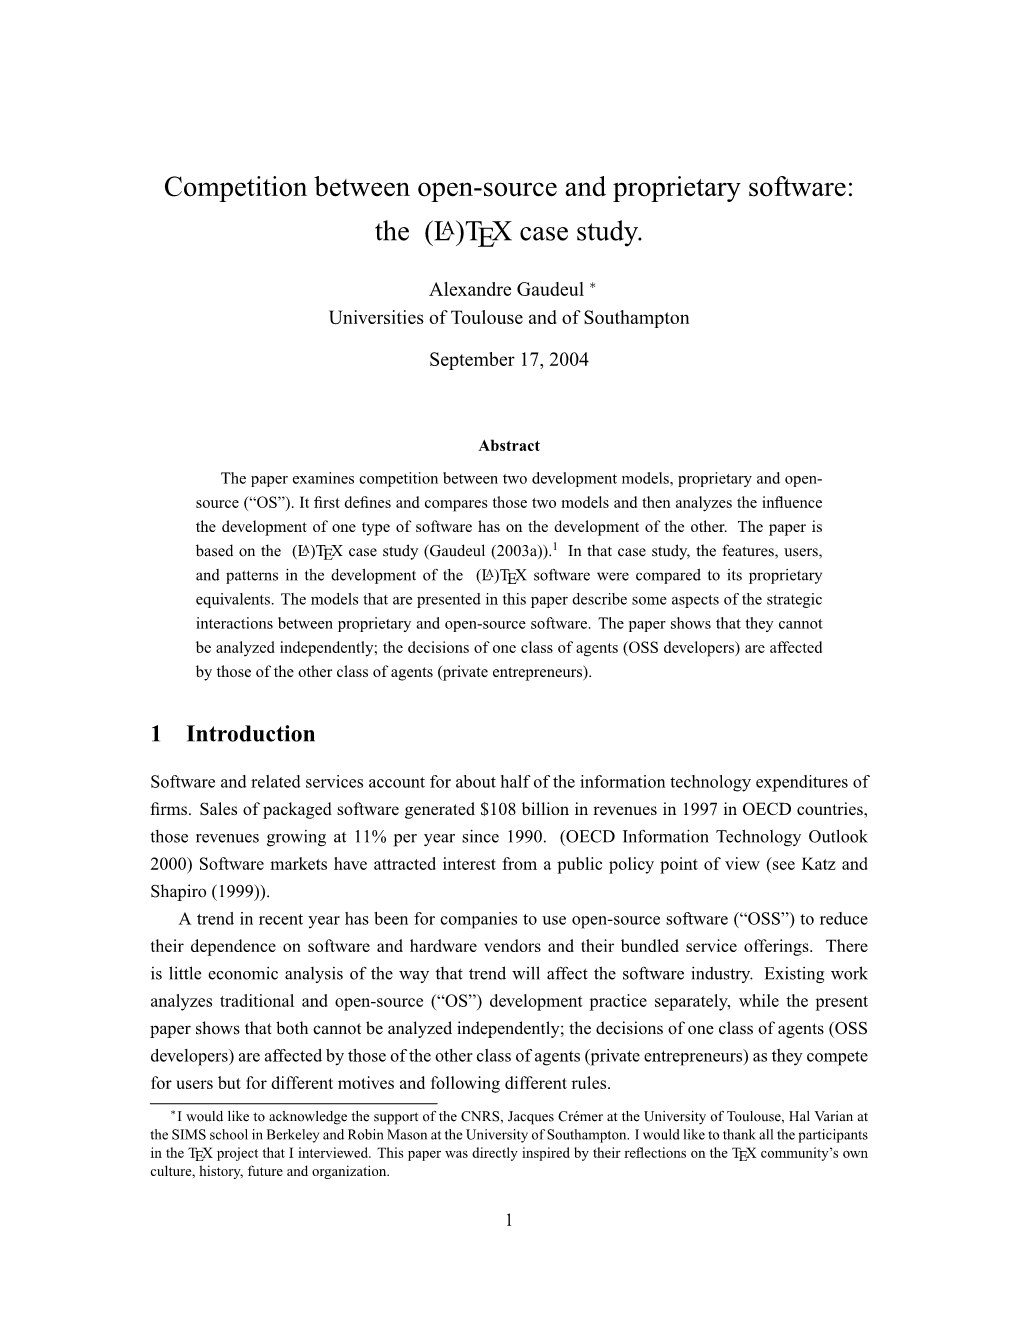 Competition Between Open-Source and Proprietary Software: the (LA)TEX Case Study